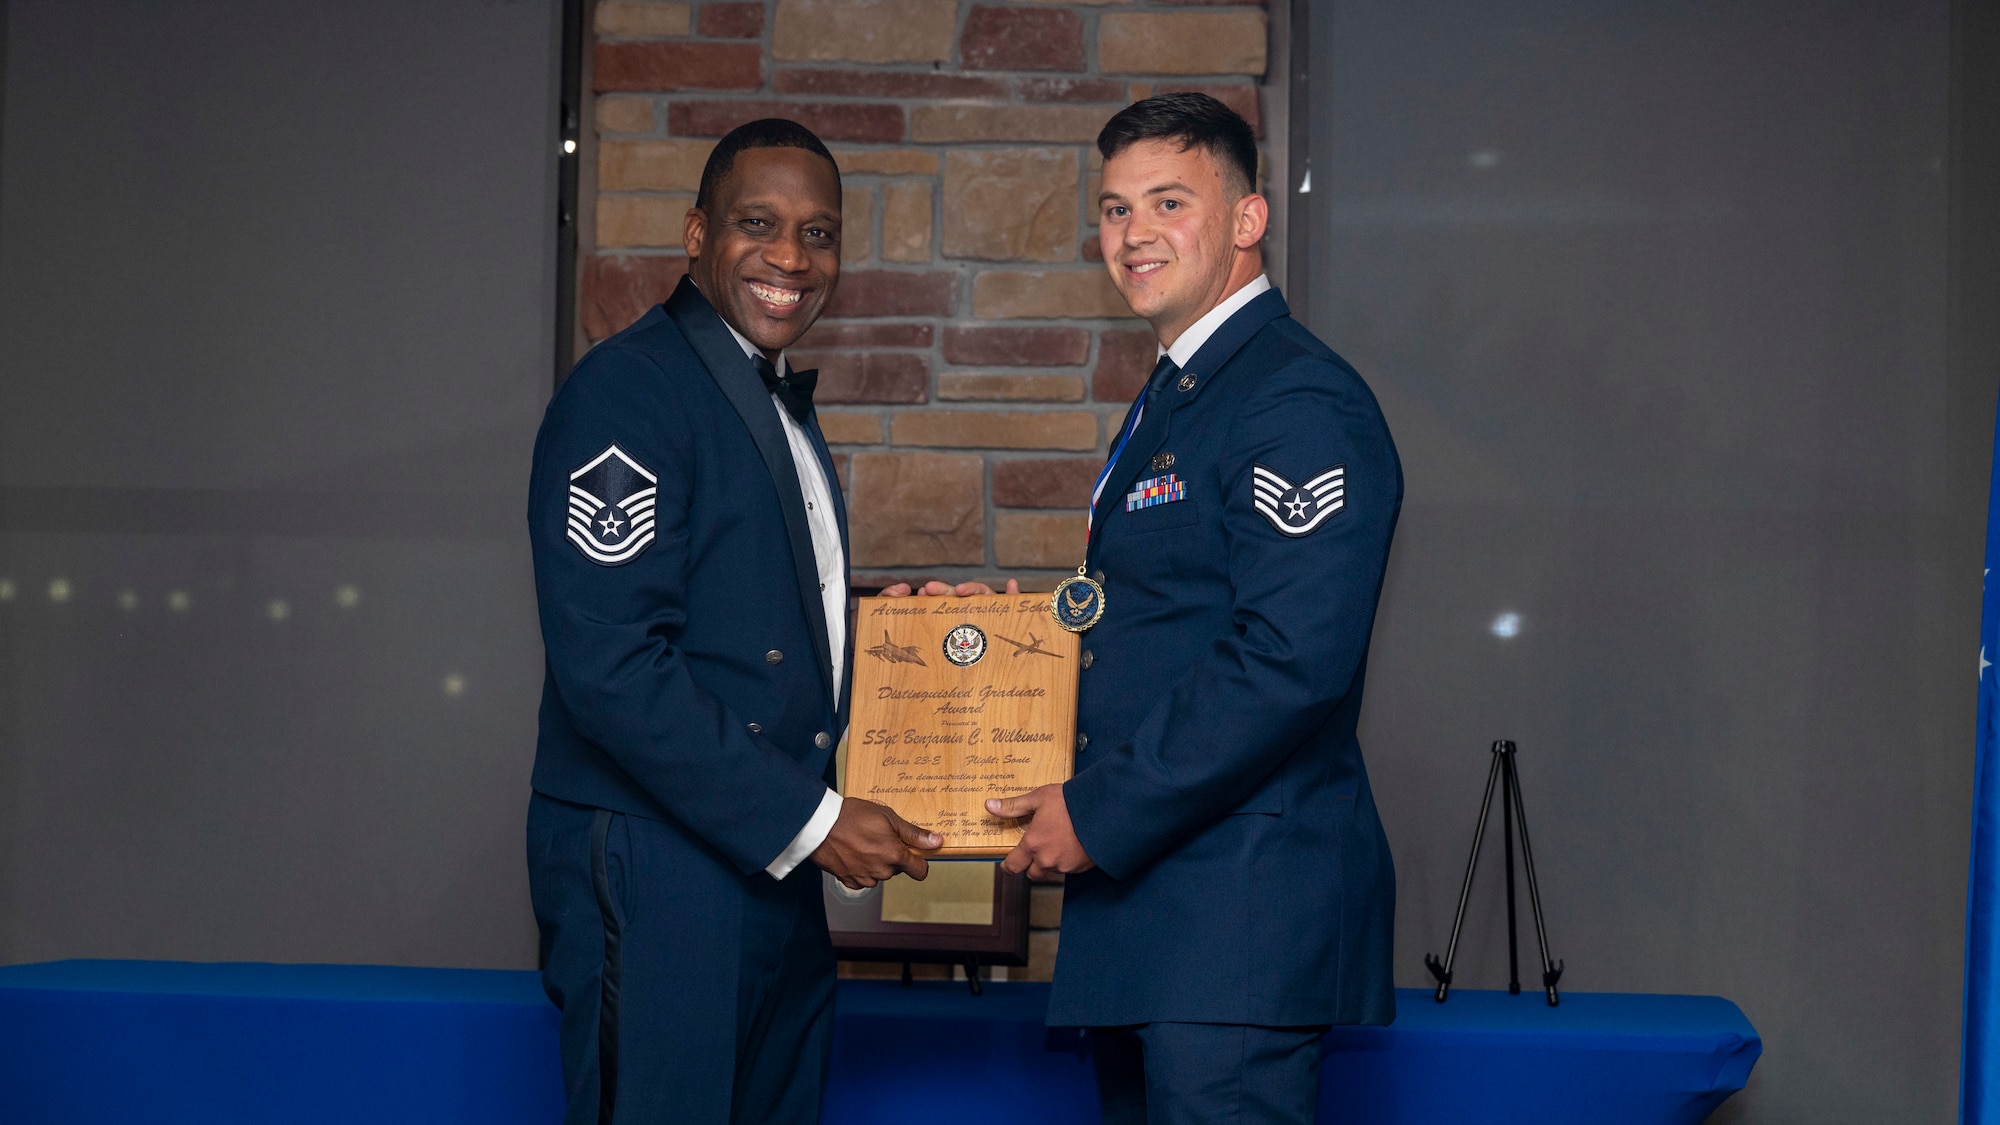 U.S. Air Force Staff Sgt. Benjamin Wilkinson, Airman Leadership Graduate, accepts the Distinguished Graduate Award during the graduation of ALS Class 23-E at Holloman Air Force Base, New Mexico, May 24, 2023.